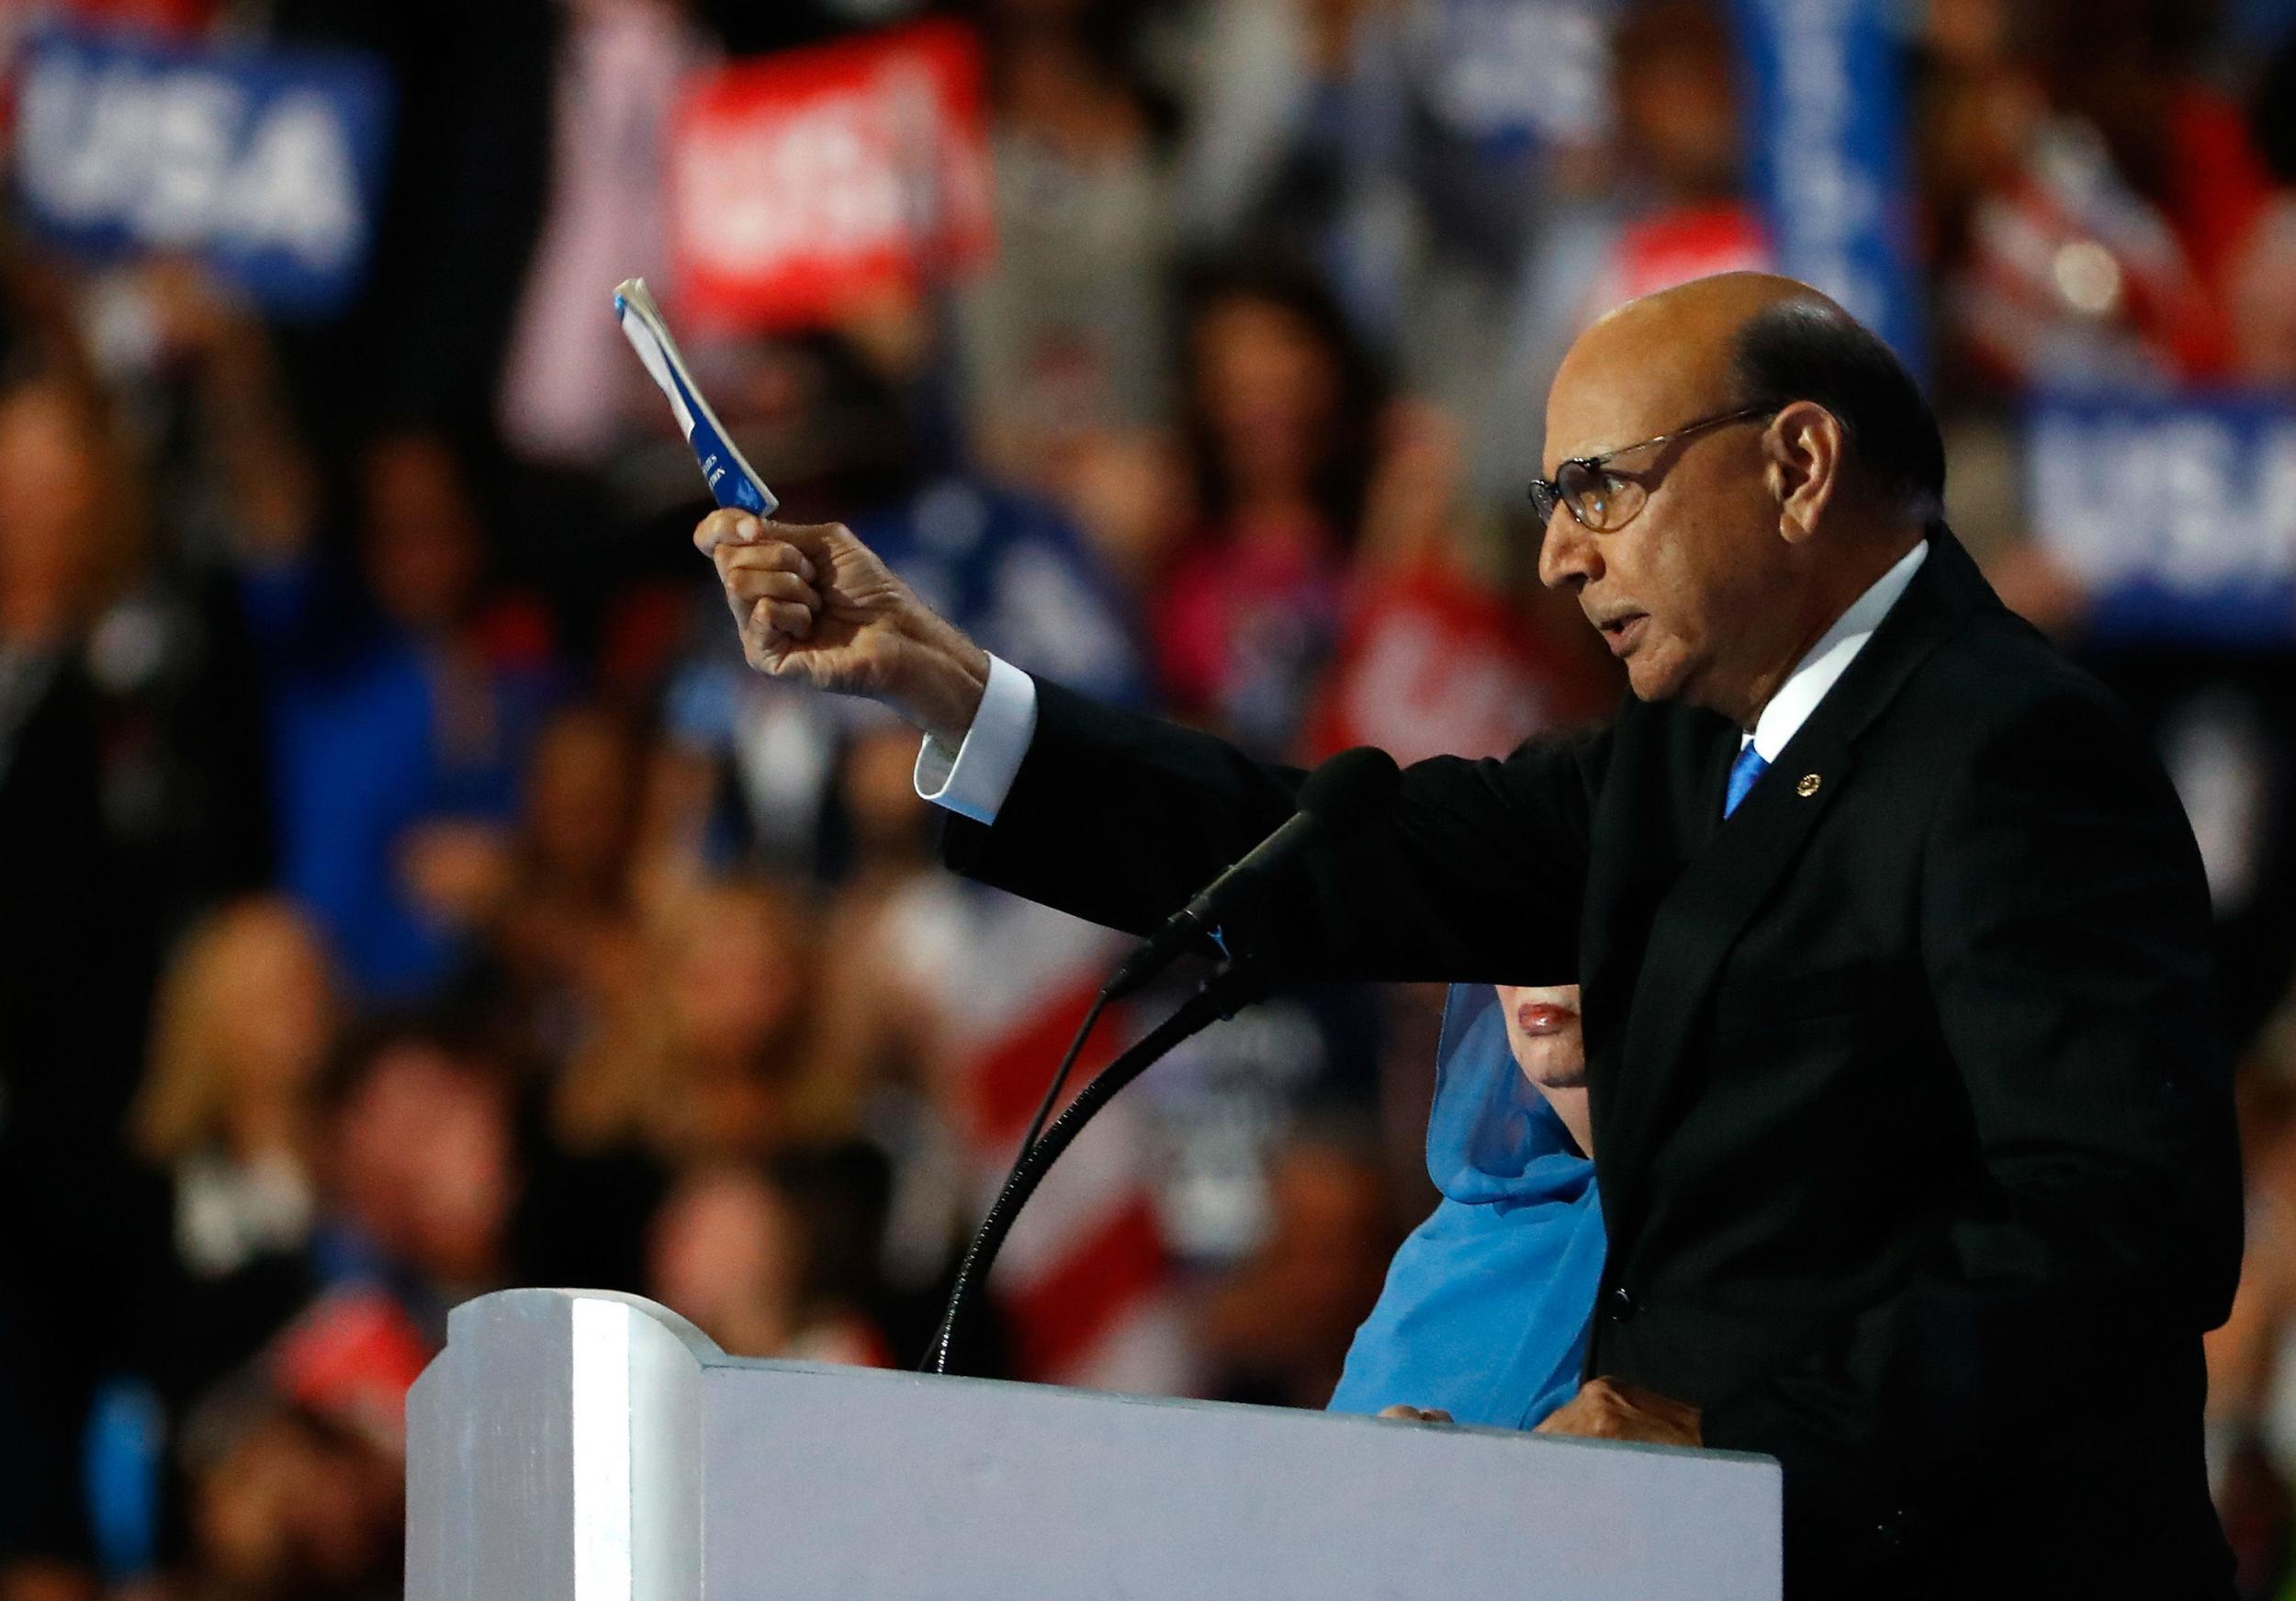 Khizr Khan, whose son was slain in Iraq, addresses the Democratic Convention